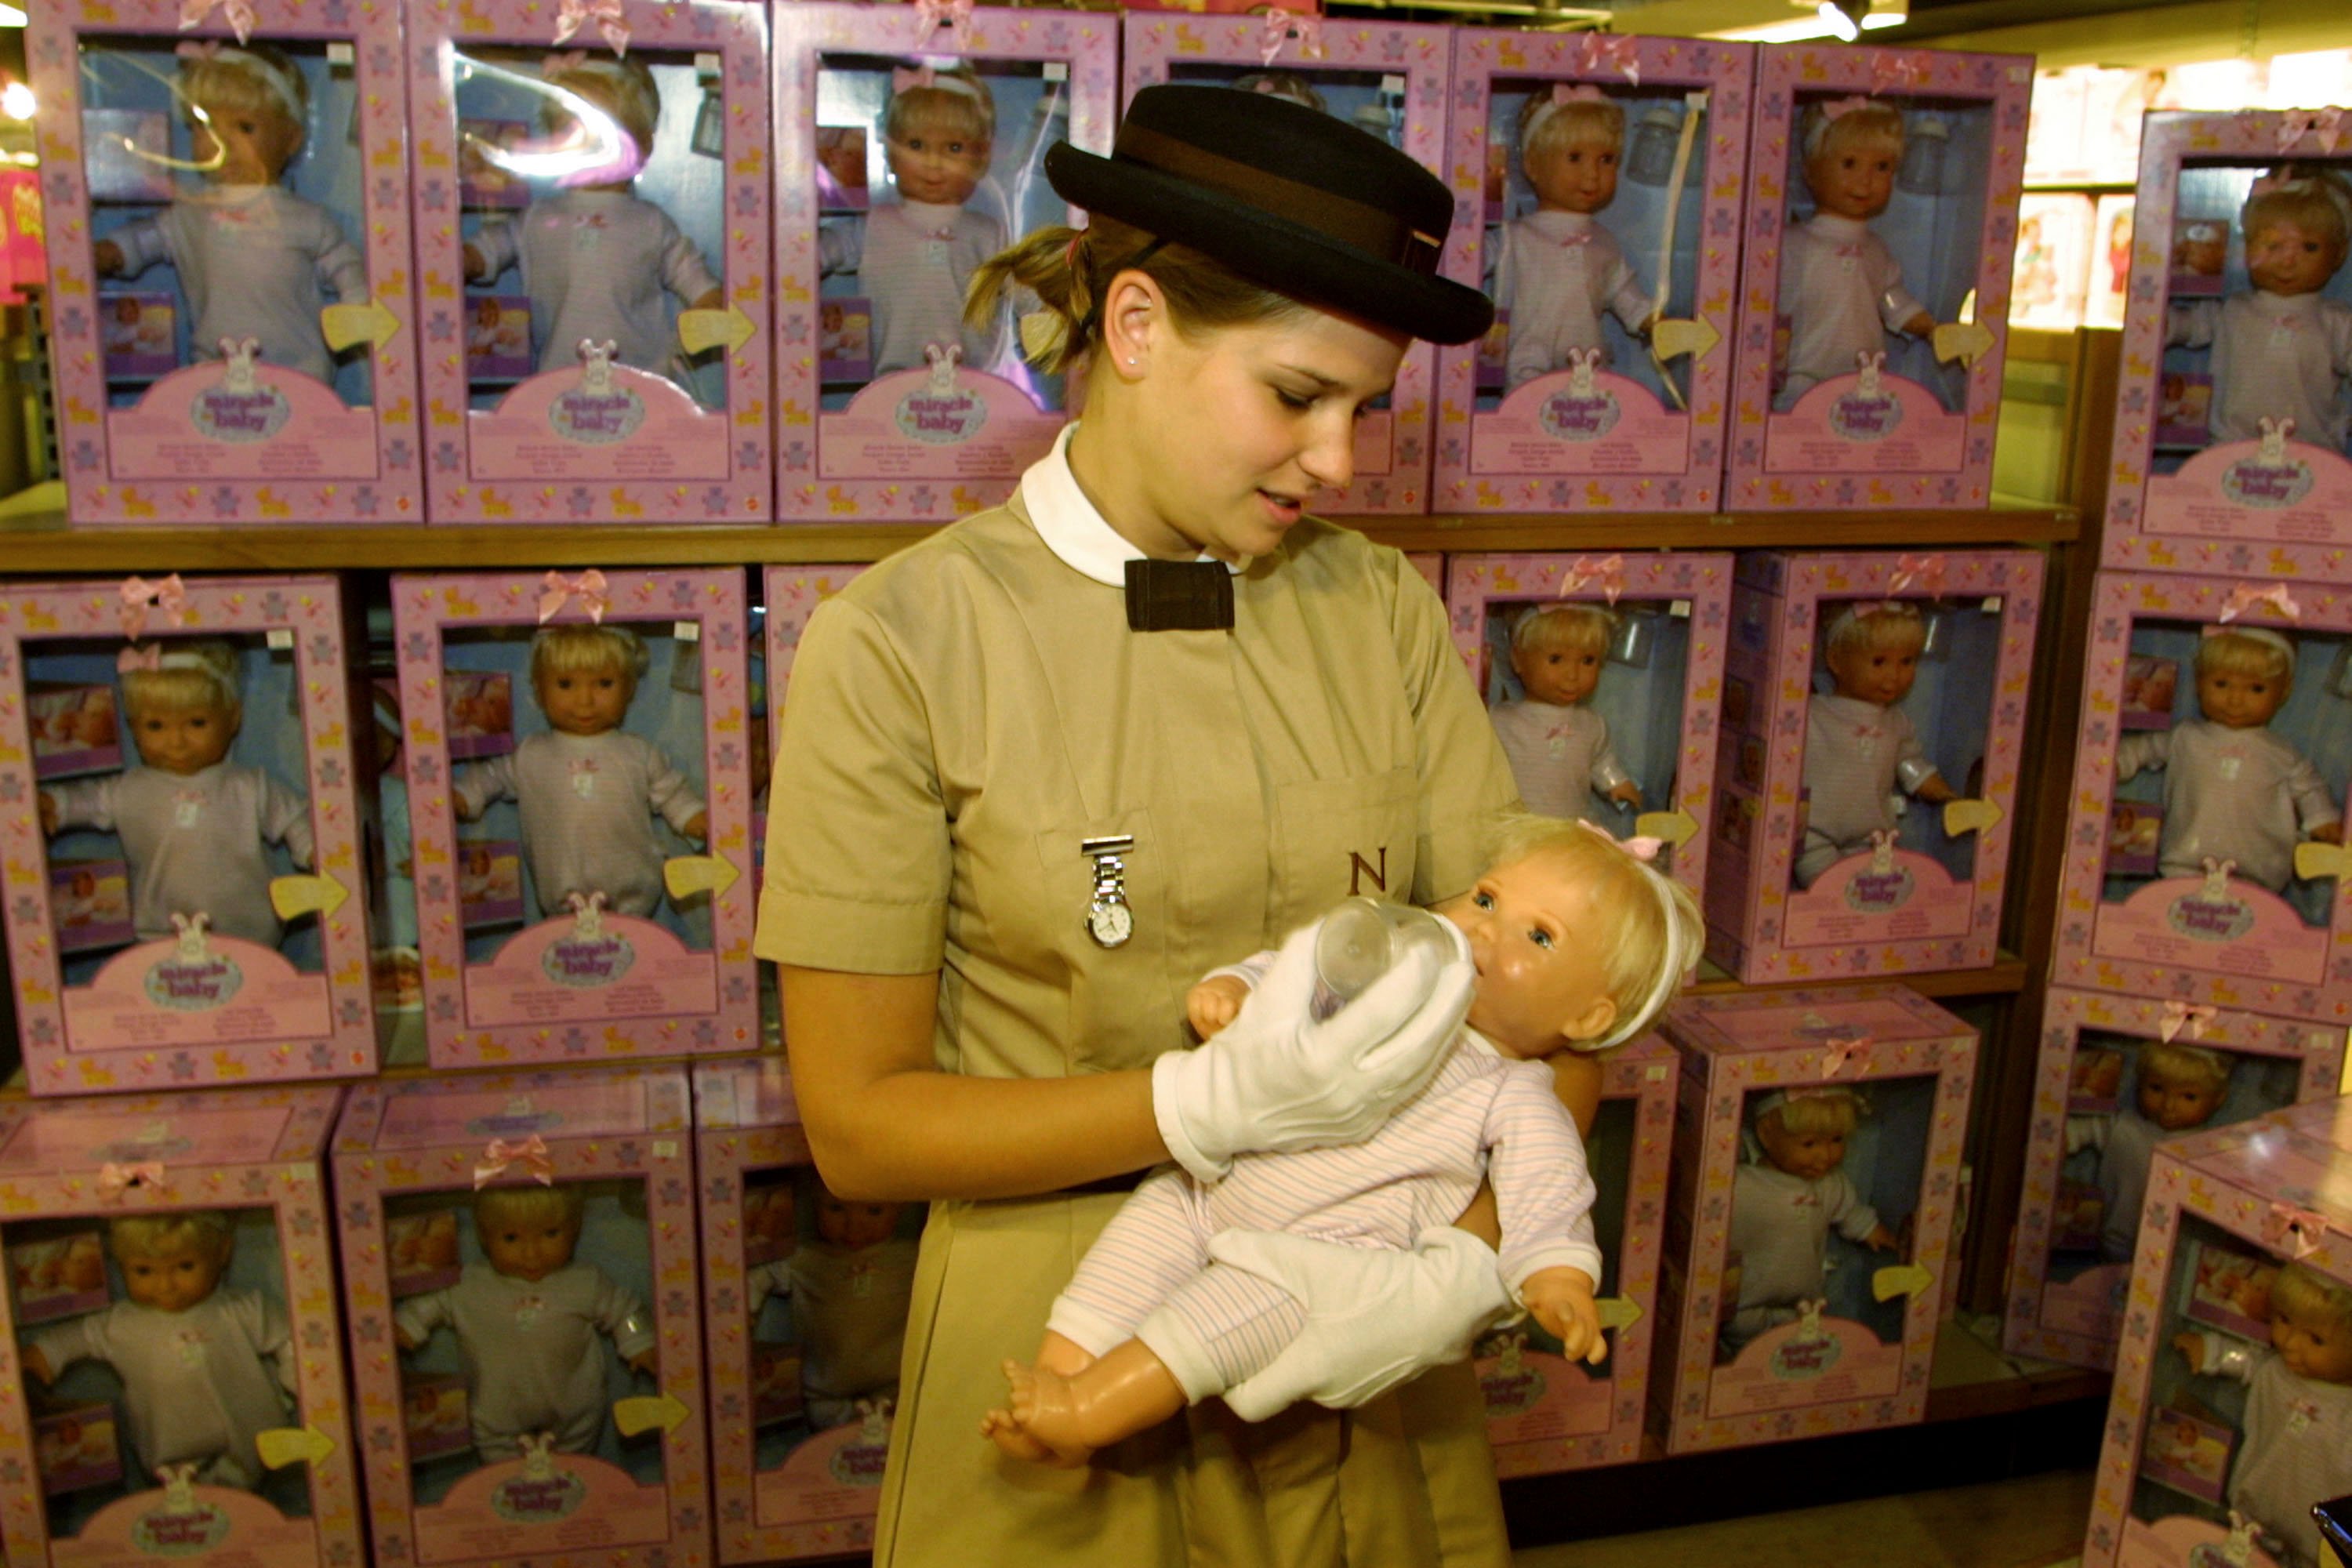 Anna-Louise Kemp, a nanny from the Norland Nanny College, tries out the new "Miracle Baby" doll August 1, 2001 at the doll''s launch in London. The doll contains a microchip that simulates the behavior of a 6-month-old baby. | Source: Getty Images.